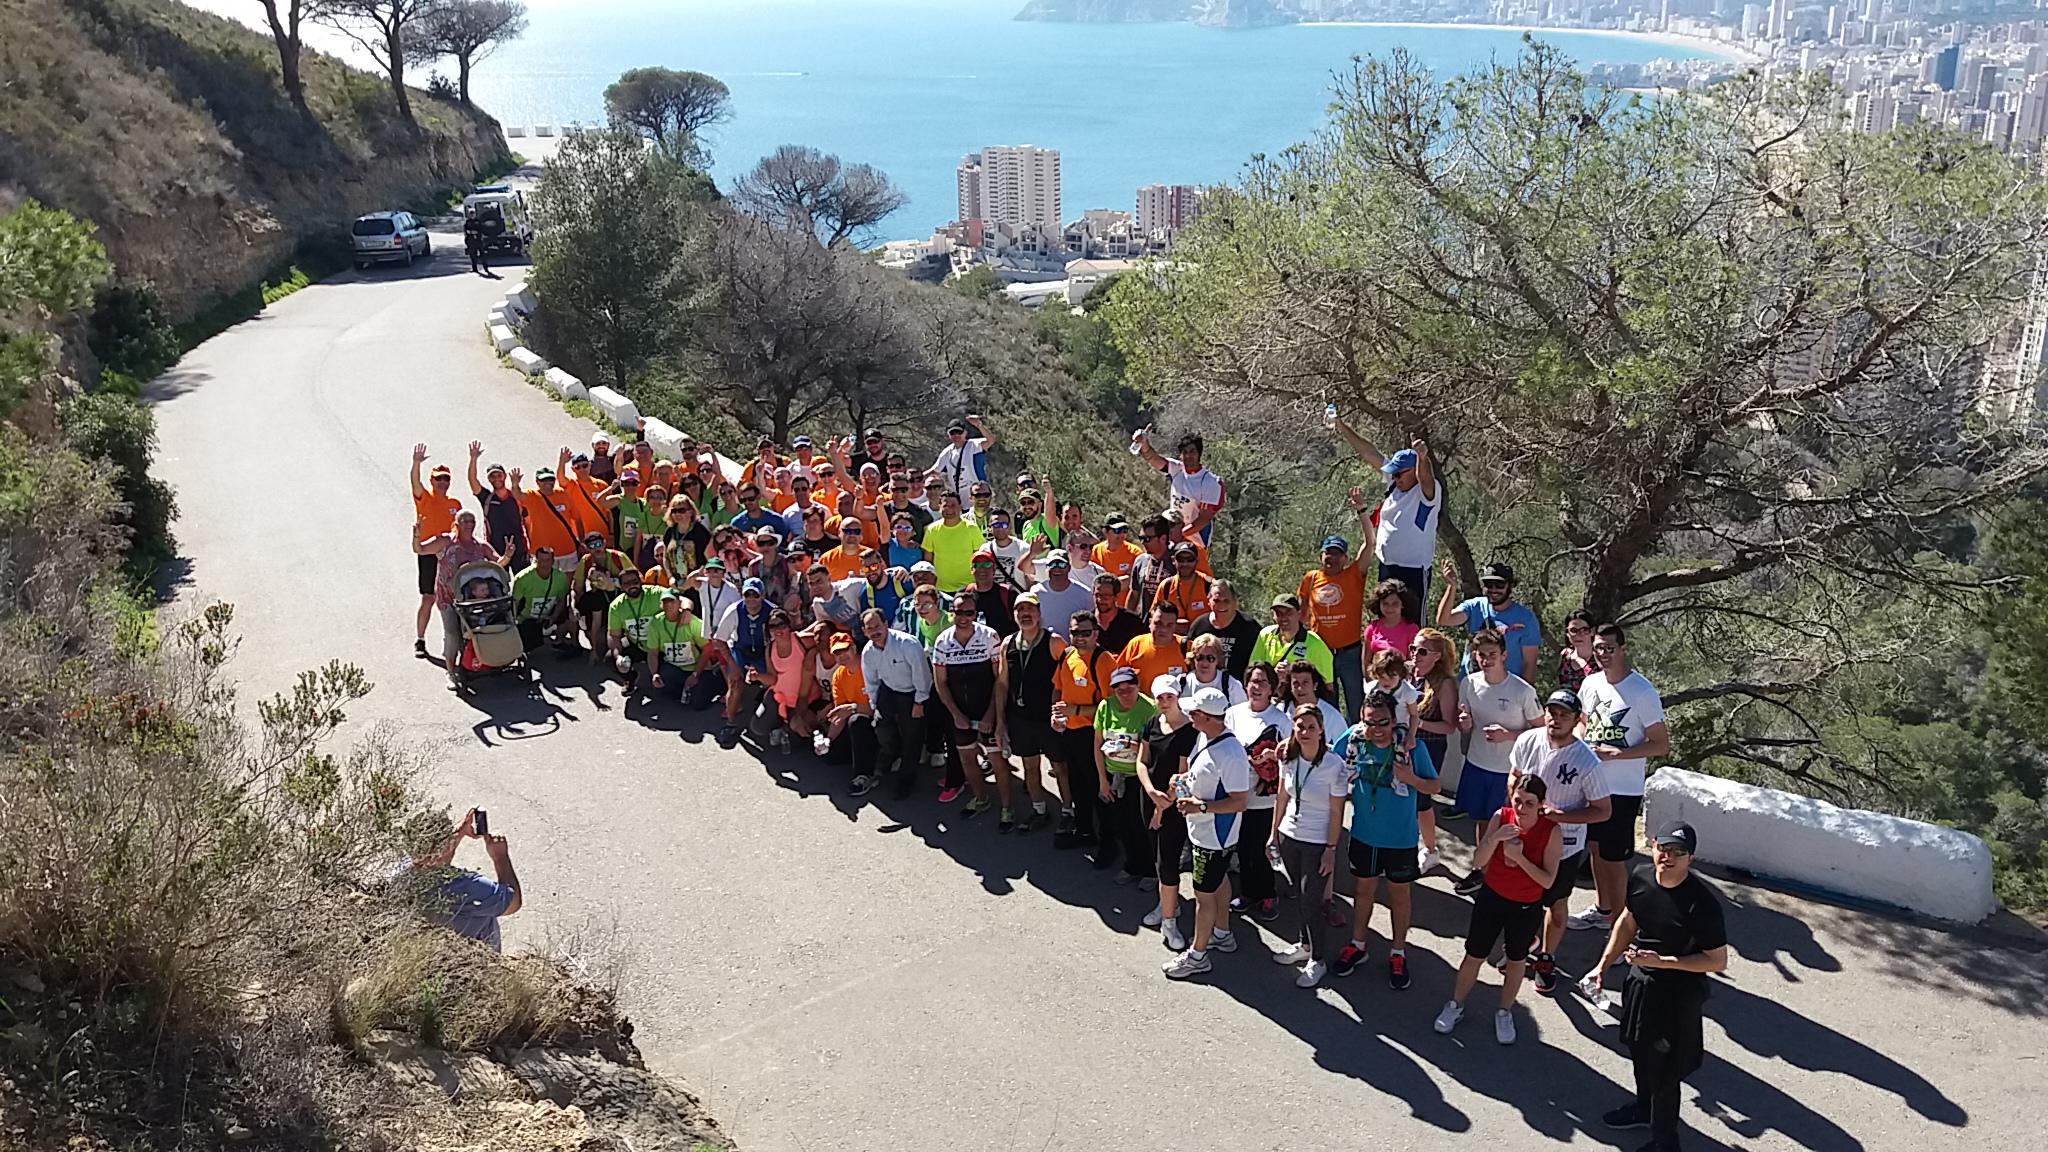 Workers, family and friends participated in FCC's second 10 km March in Benidorm